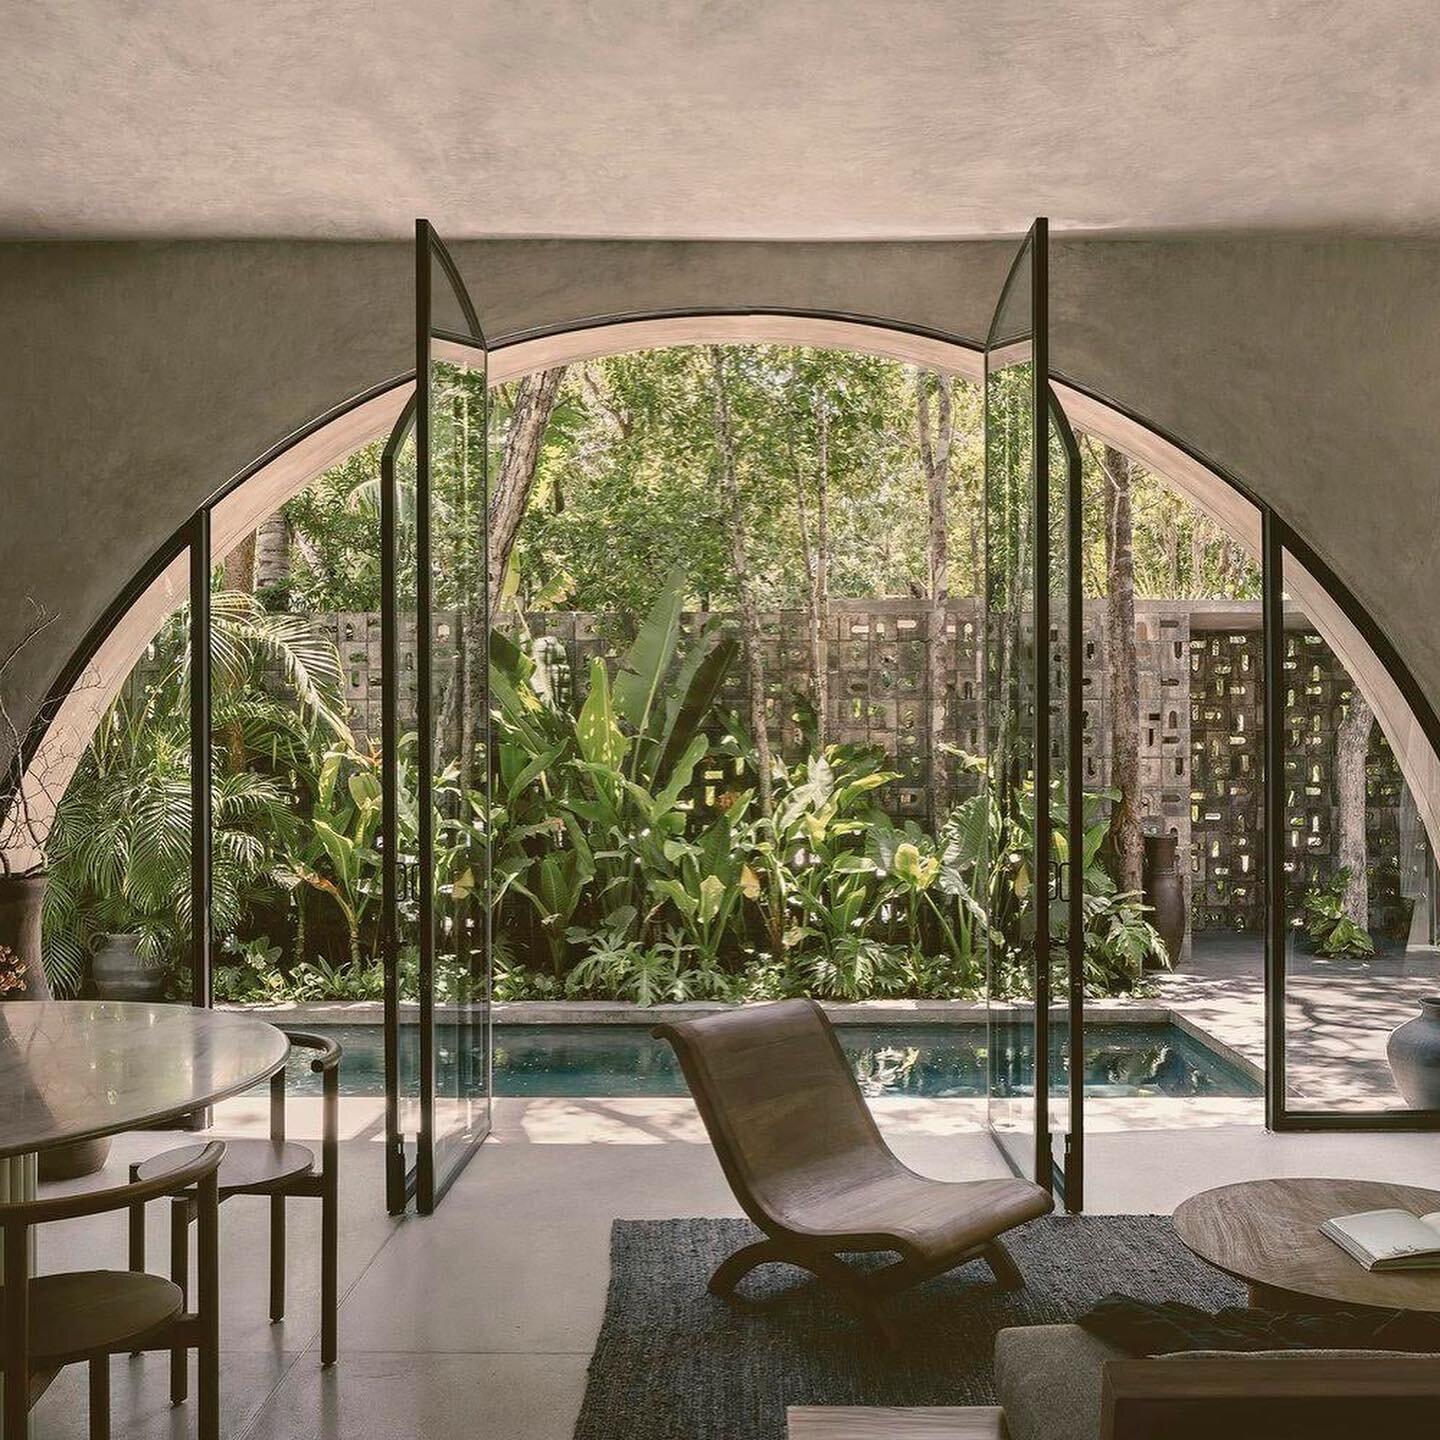 NATURAL BEAUTY Encouraging a greater connection to the natural world through design. Locally sourced materials and handcrafted finishes render rooms built around views of nature, gentle breezes, light and shadow, to create new relationships. 

Villa 